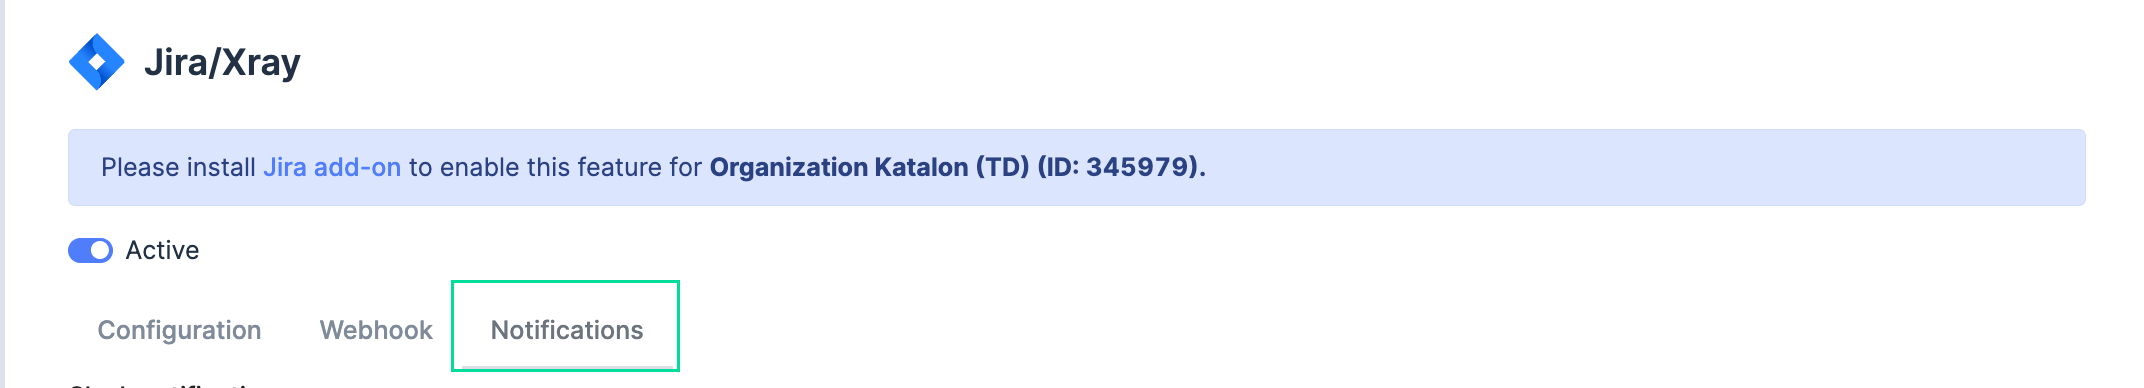 The notifications tab in the jira xray integration section of Katalon TestOps.